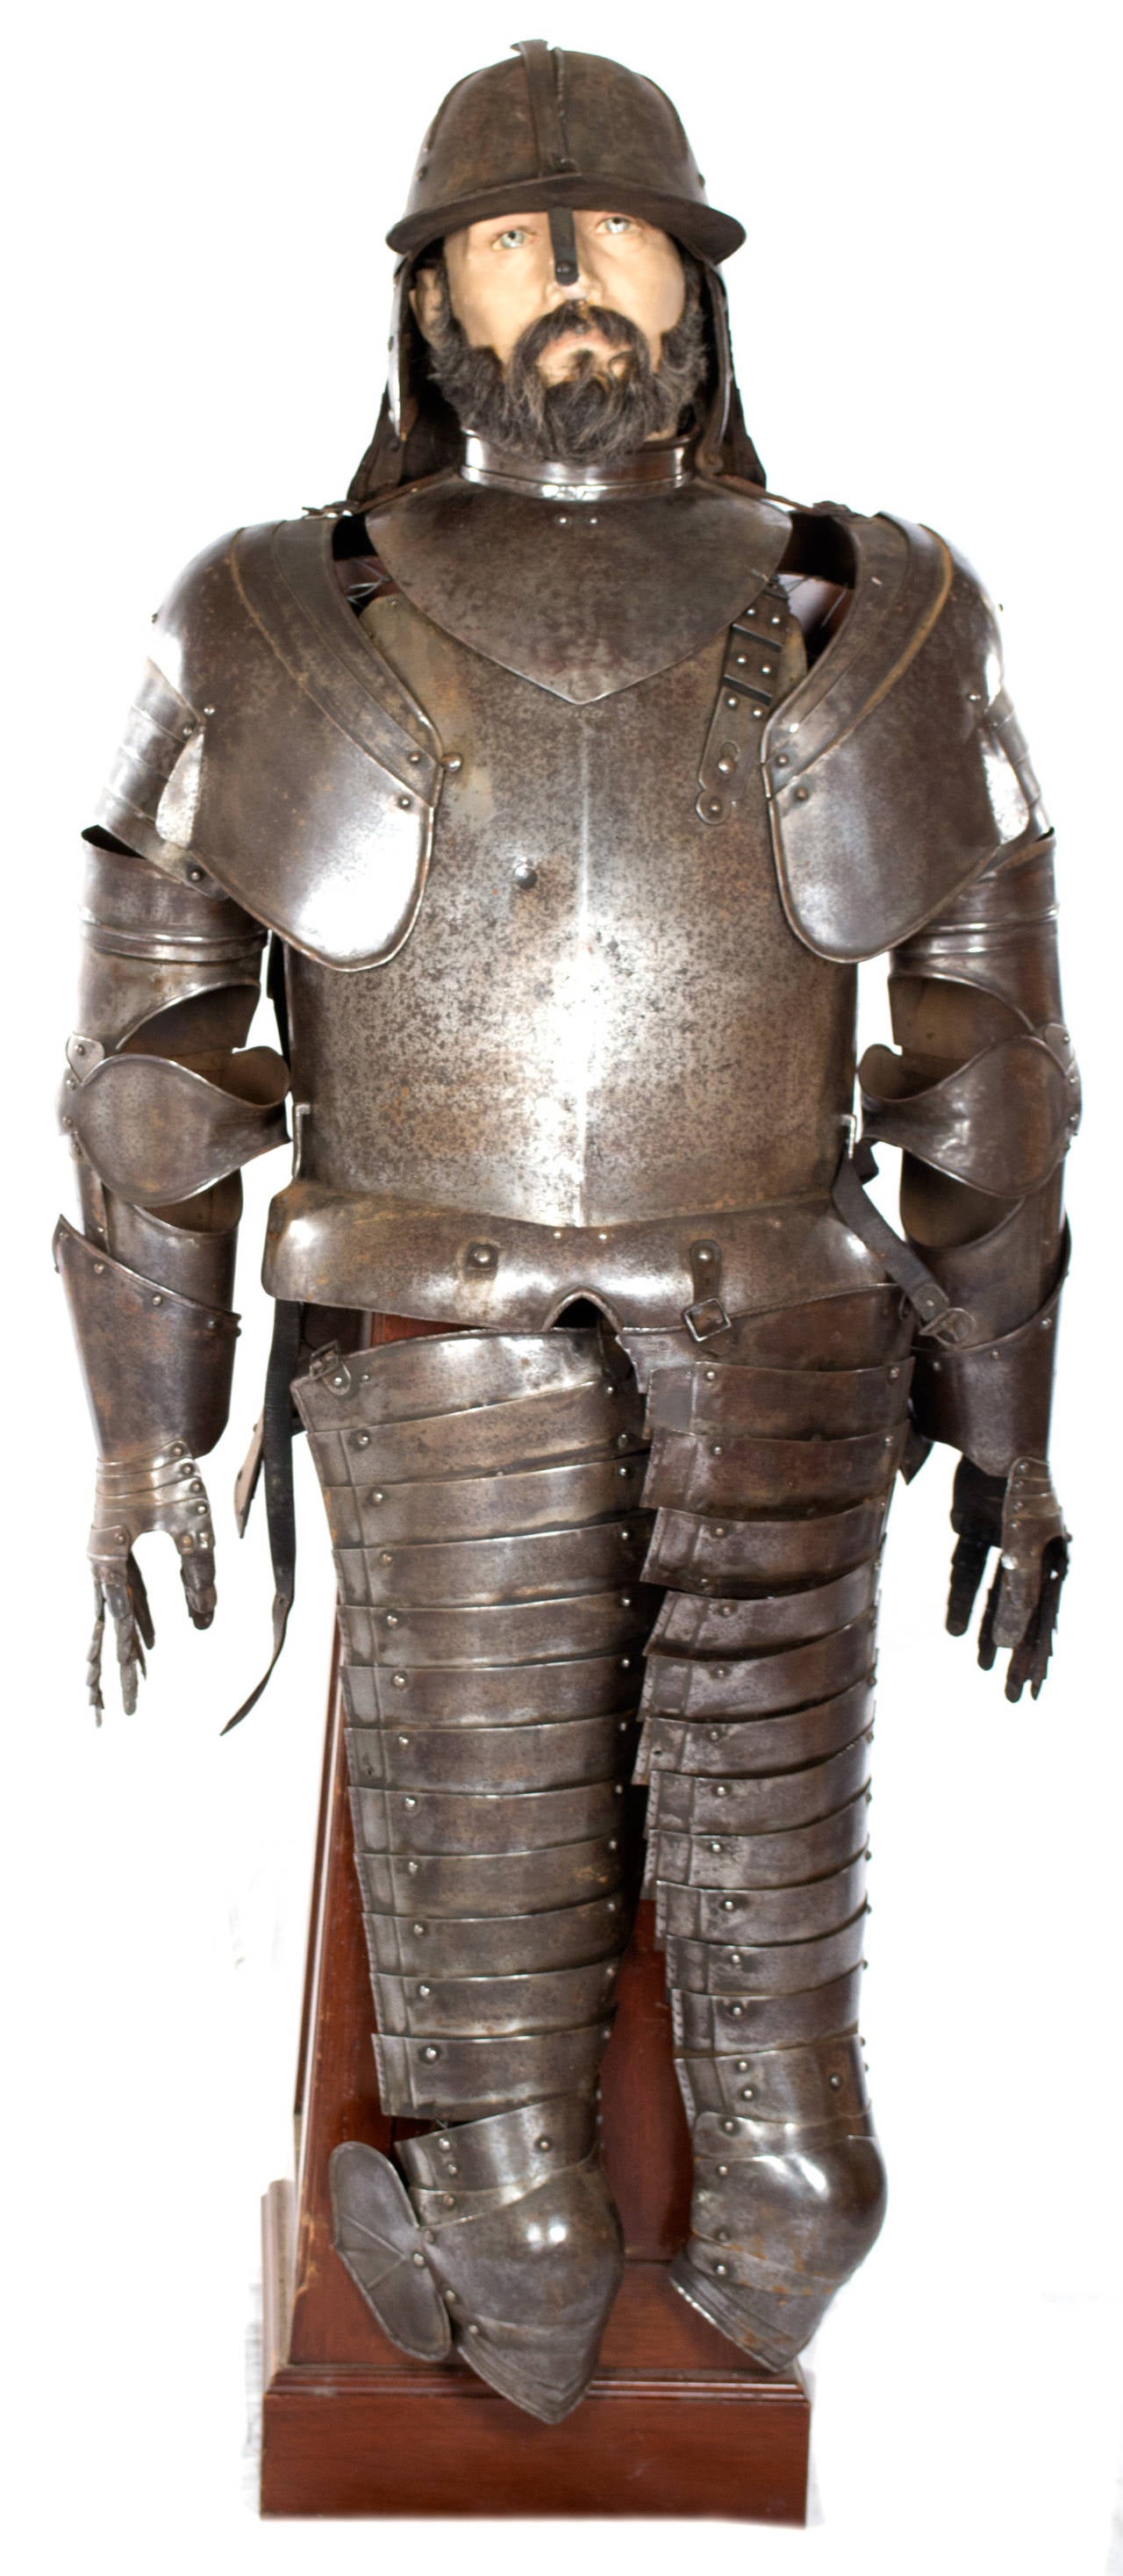 A continental suit of armor with helmet to be worn by horse rider made during the last half of the sixteenth century, and placed on a purpose-built mahogany stand with mannequin head.